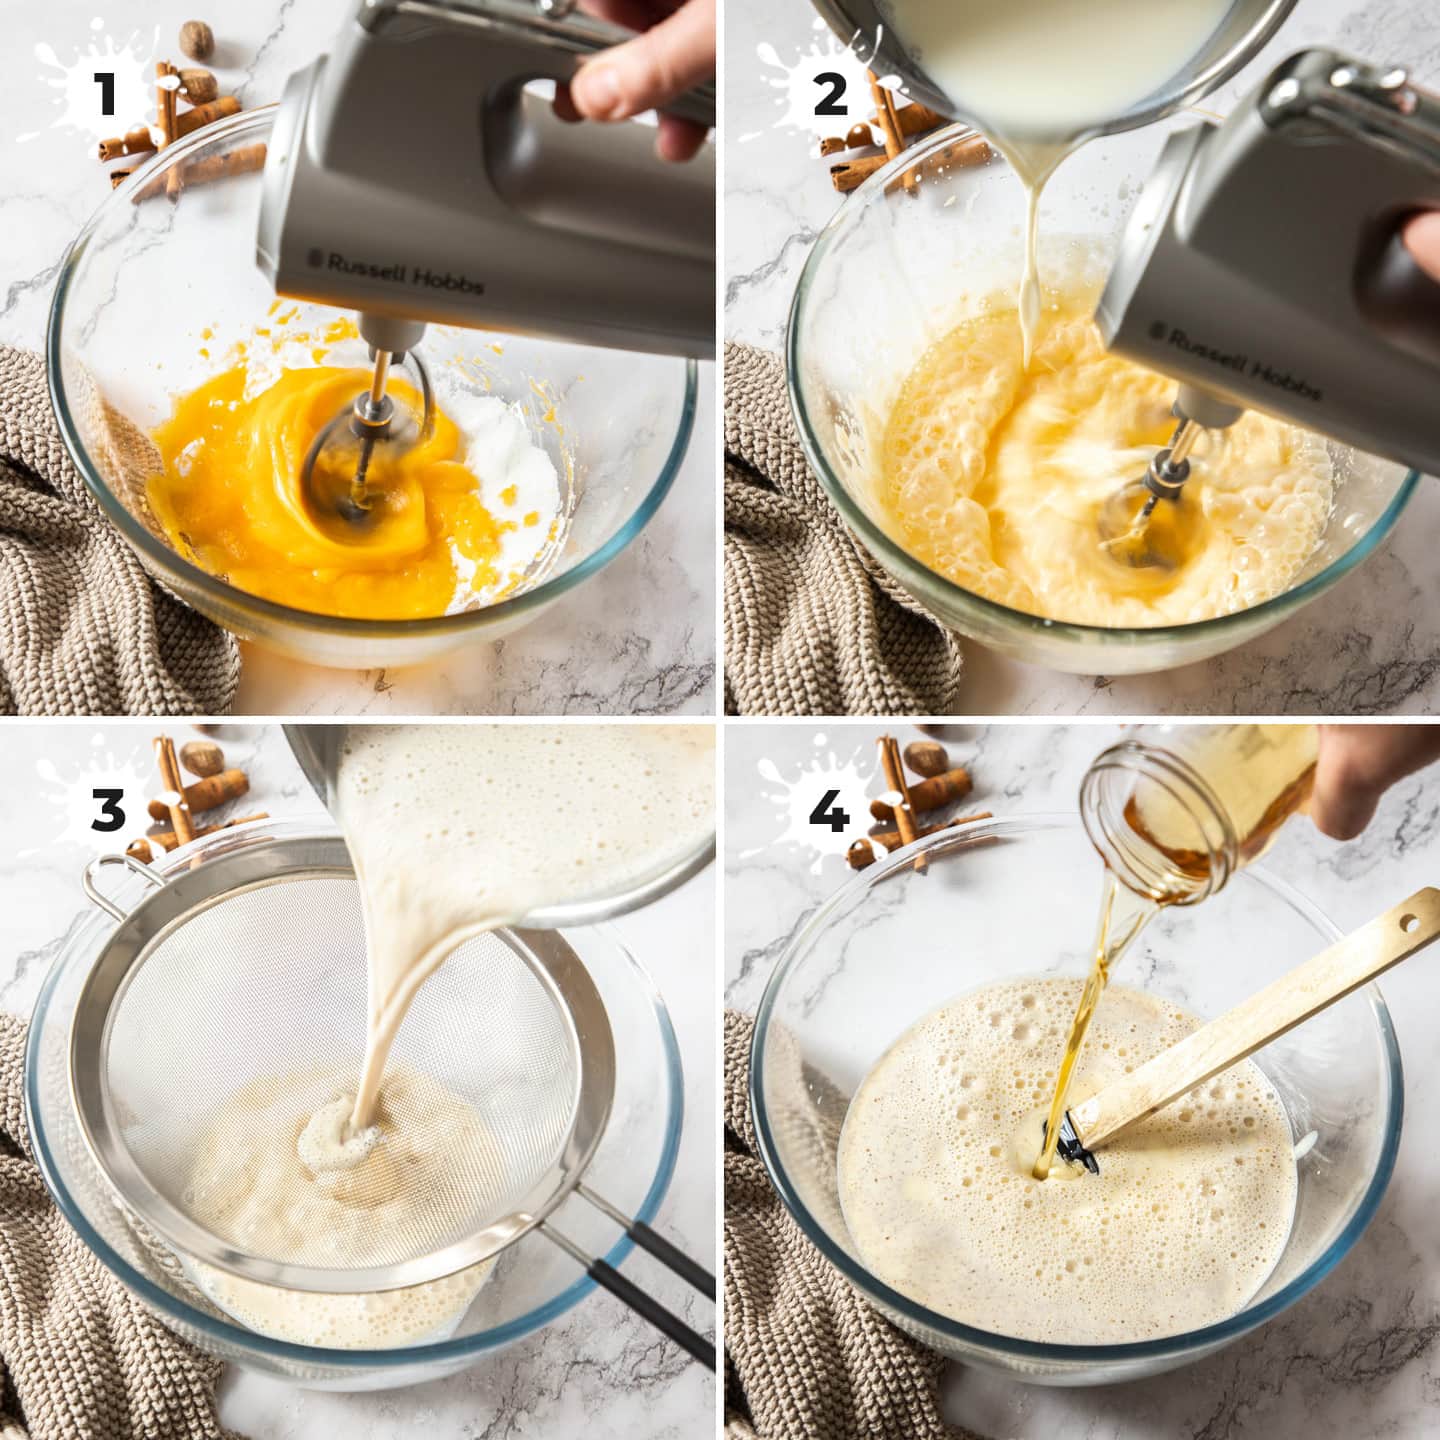 4 images showing the various stage of making eggnog